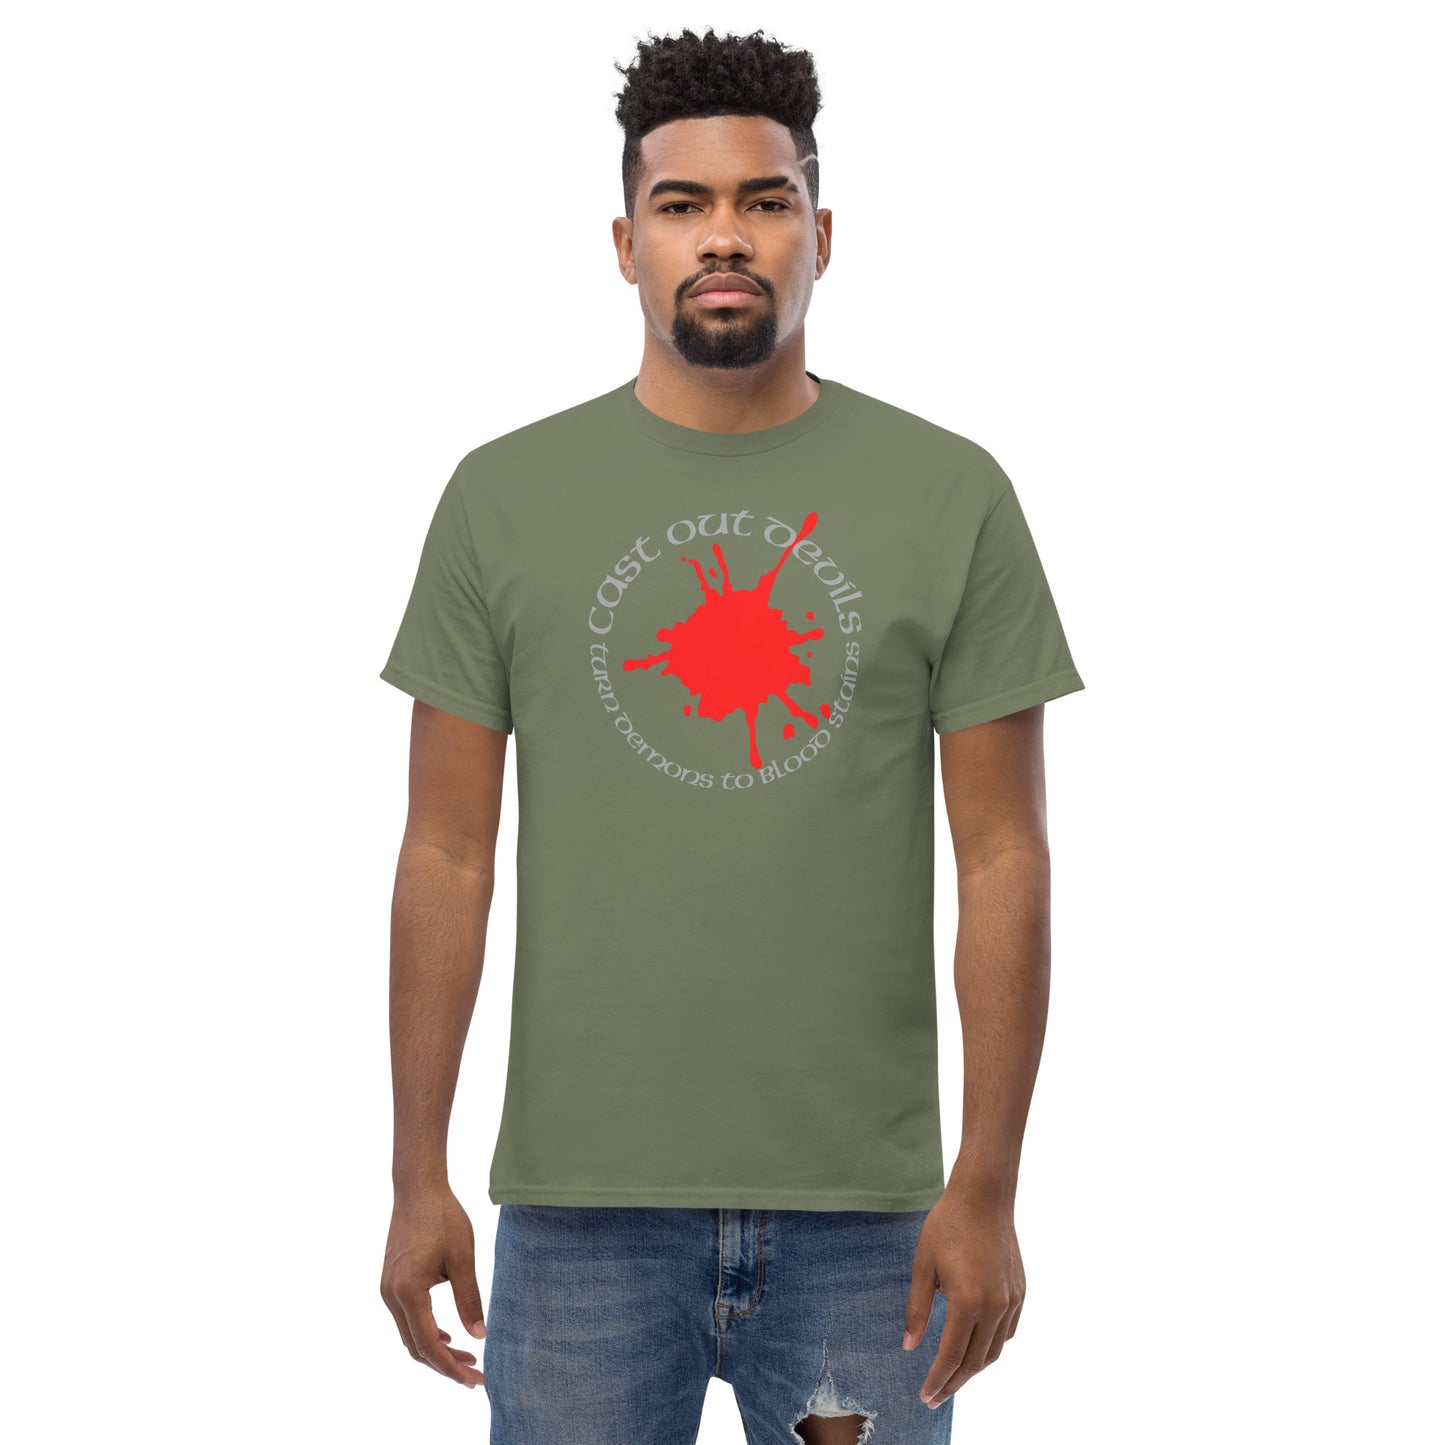 Cast Out Devils Turn Demons To Blood Stains Men's classic tee